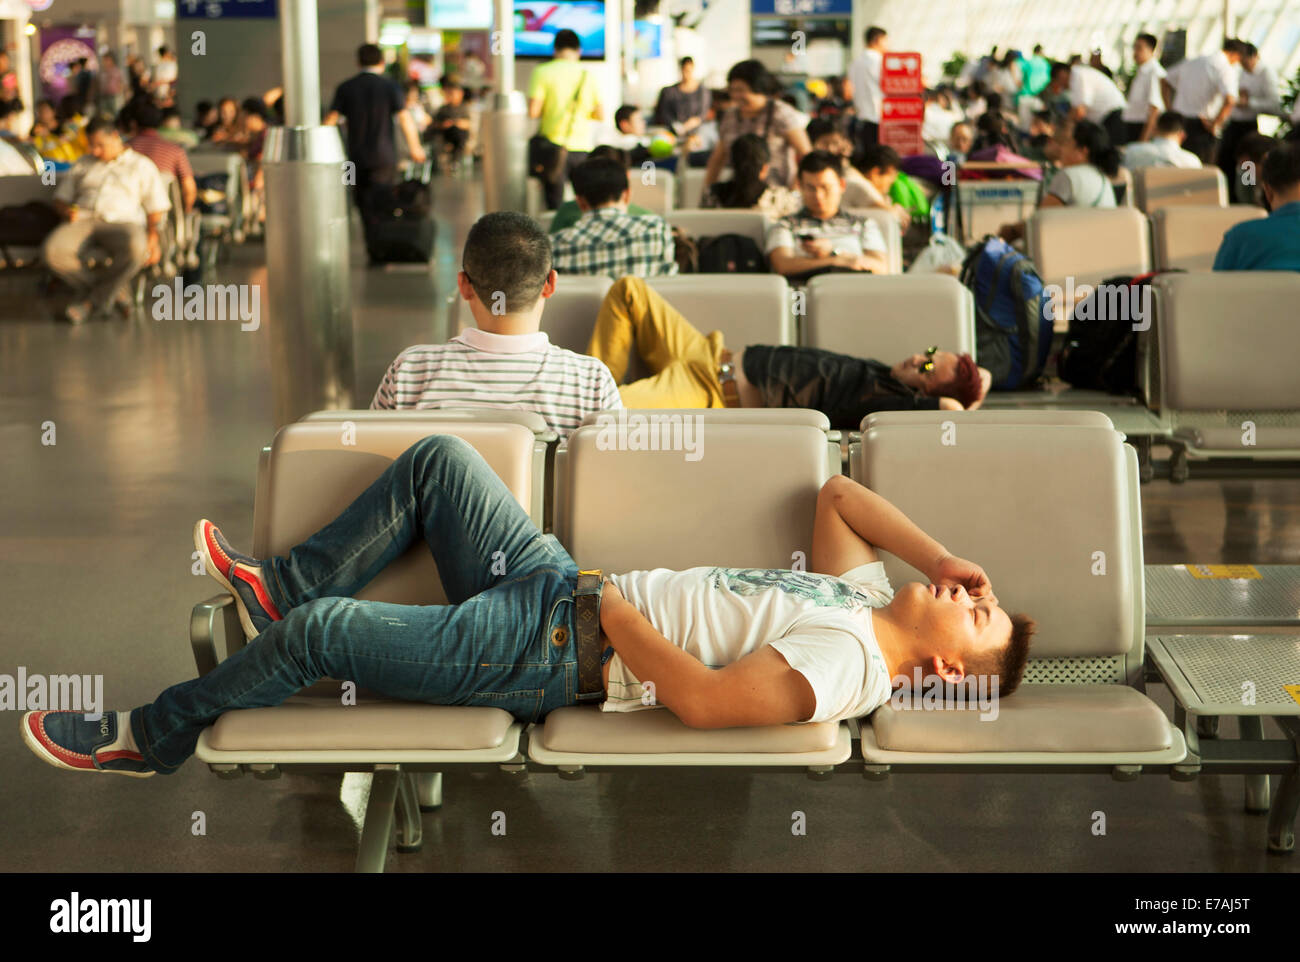 Chinese international Airport, China. Air passengers waiting resting sleeping napping in departure lounge chairs seats Stock Photo